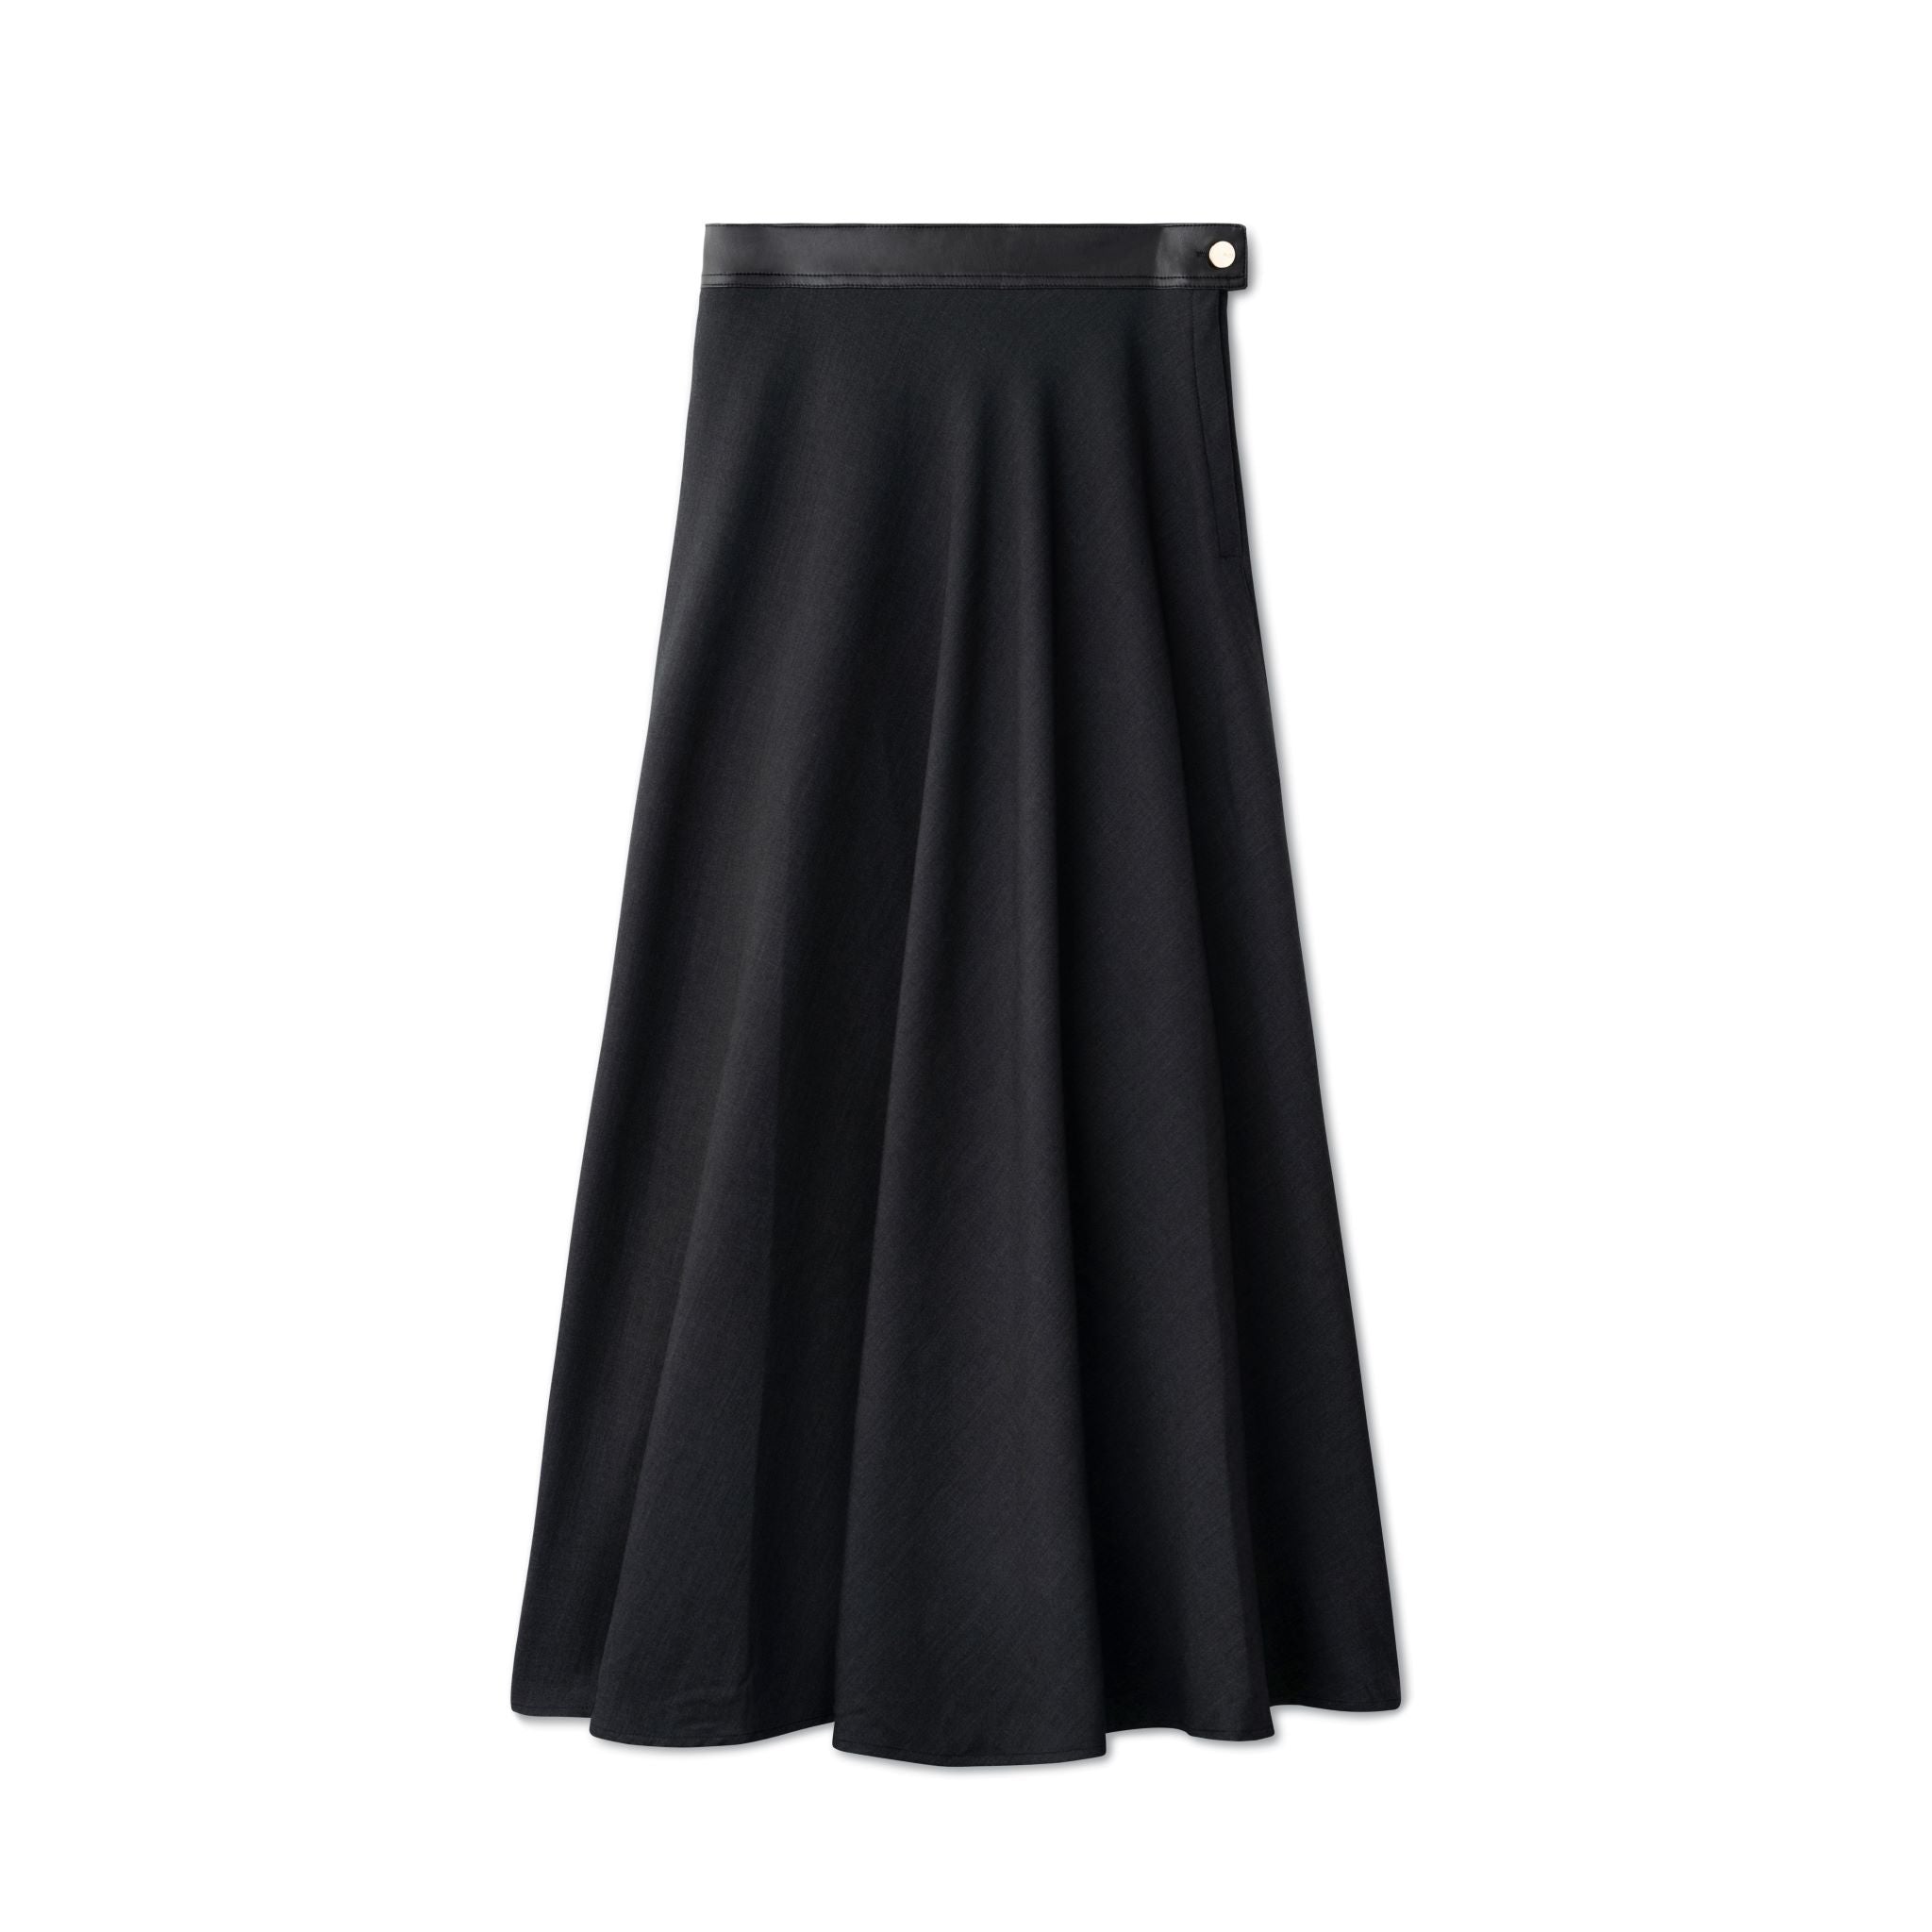 Signature Circle Skirt with Leather Waist Band IN: Black